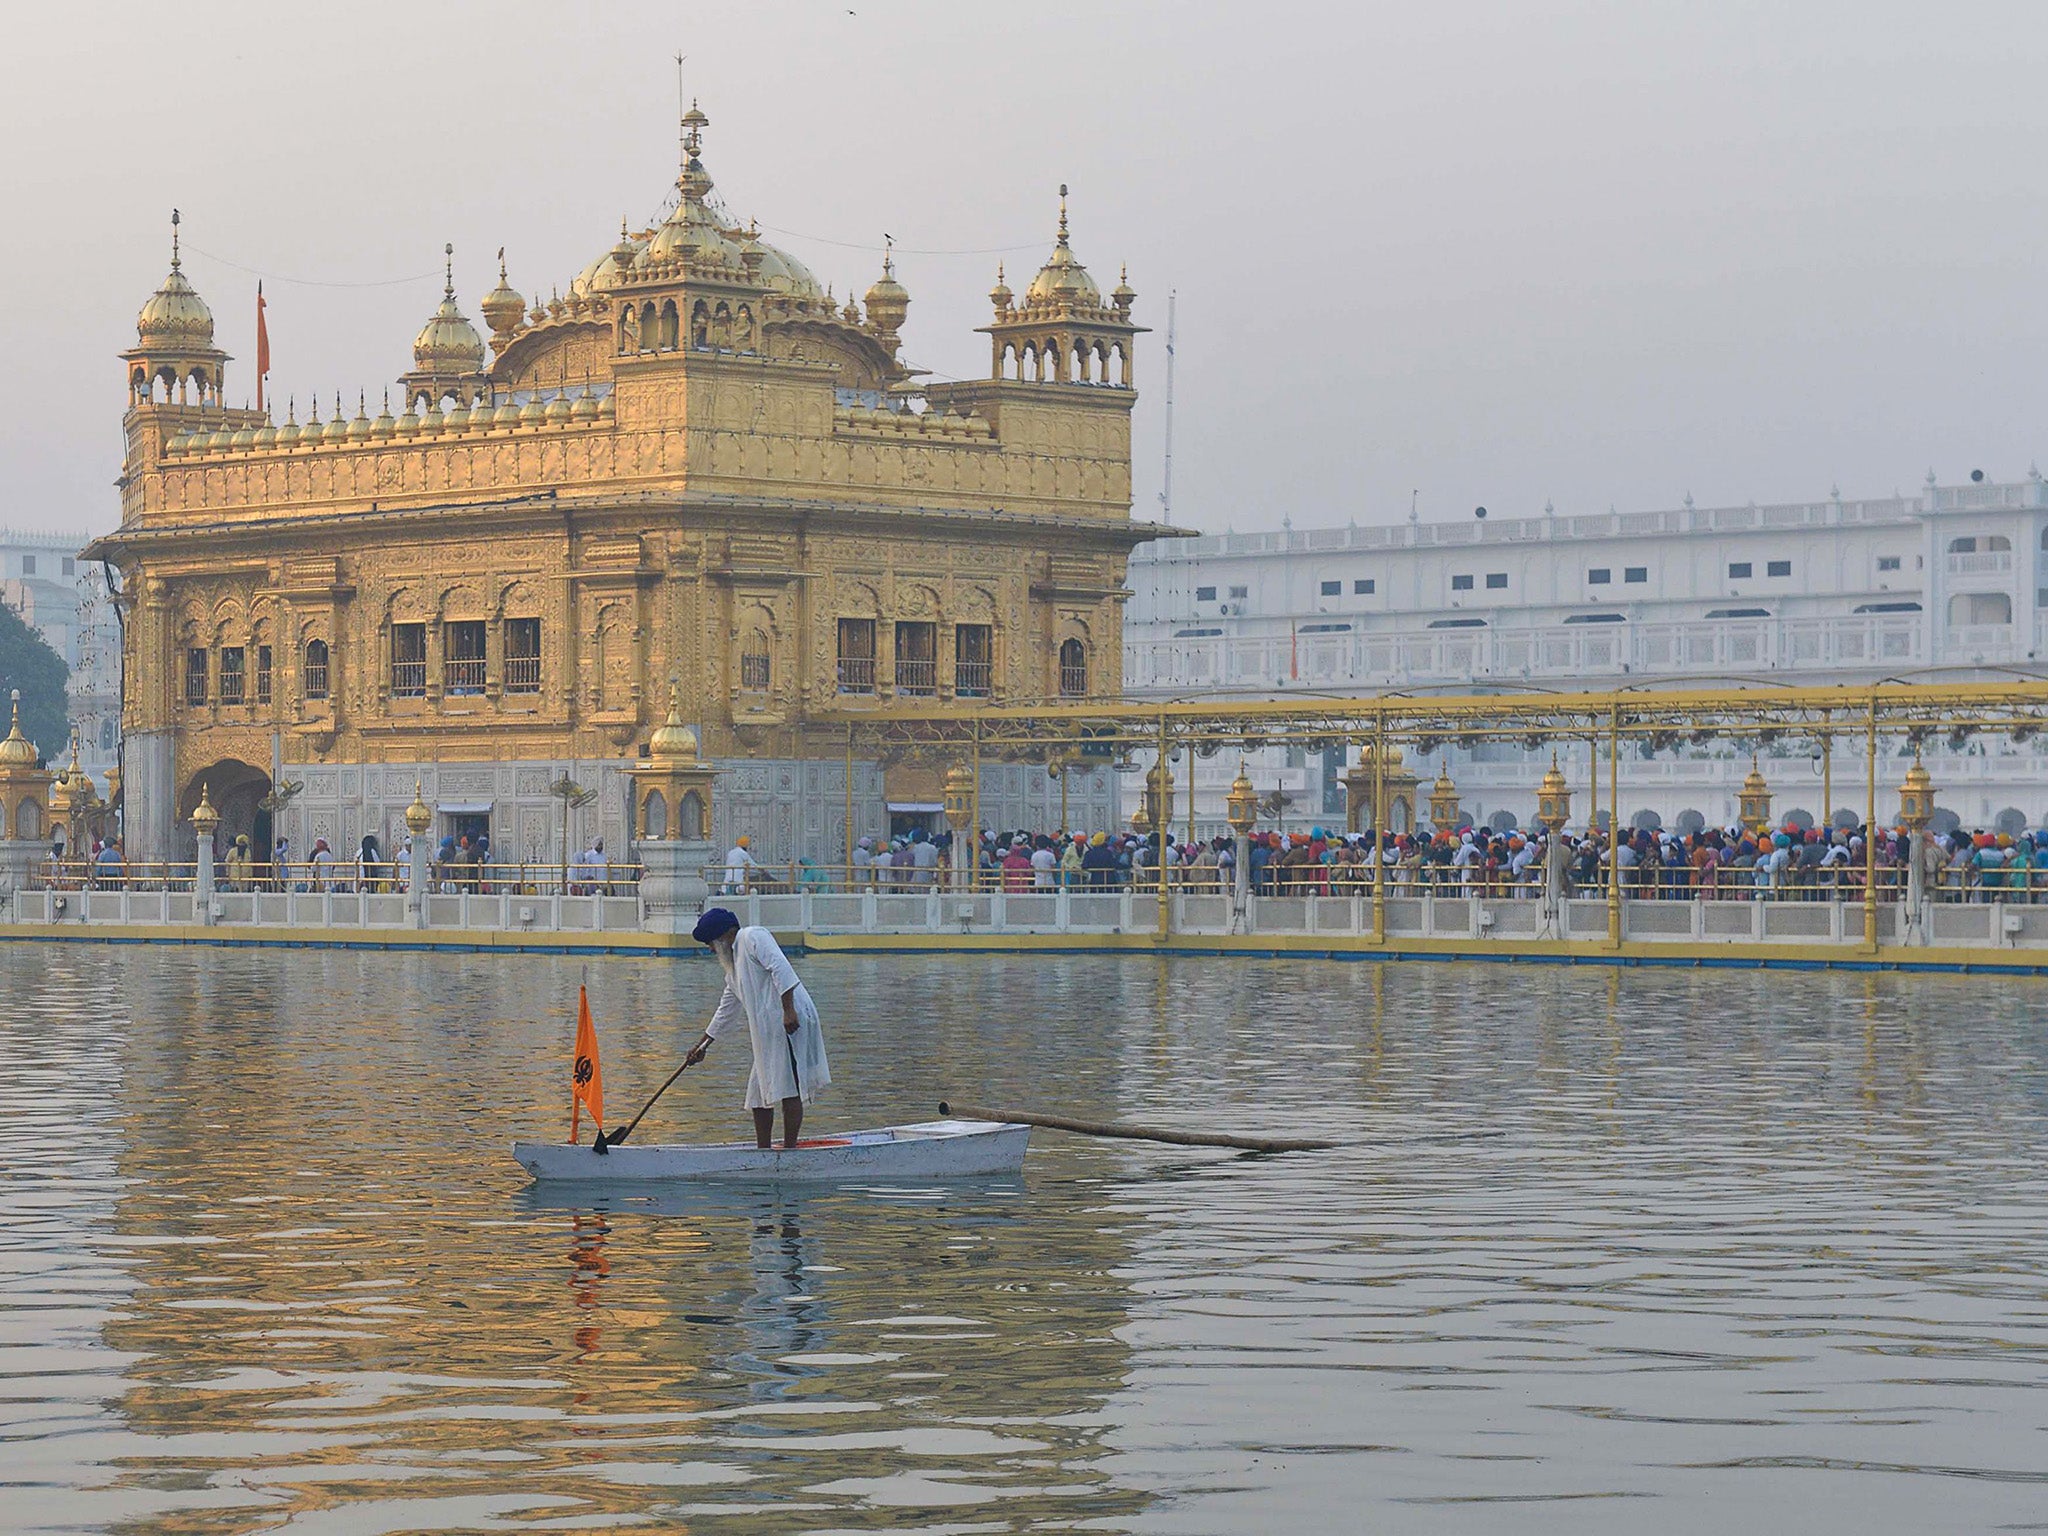 The Golden Temple is just one of the sights to see in Amritsar